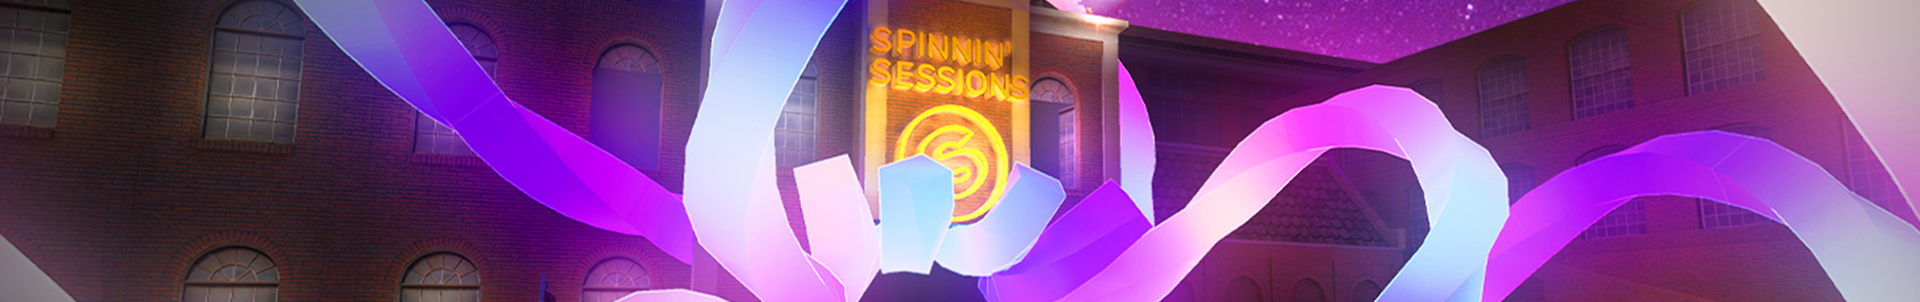 Spinnin' Records and Avakin Life team up to bring you virtual Spinnin' Sessions!